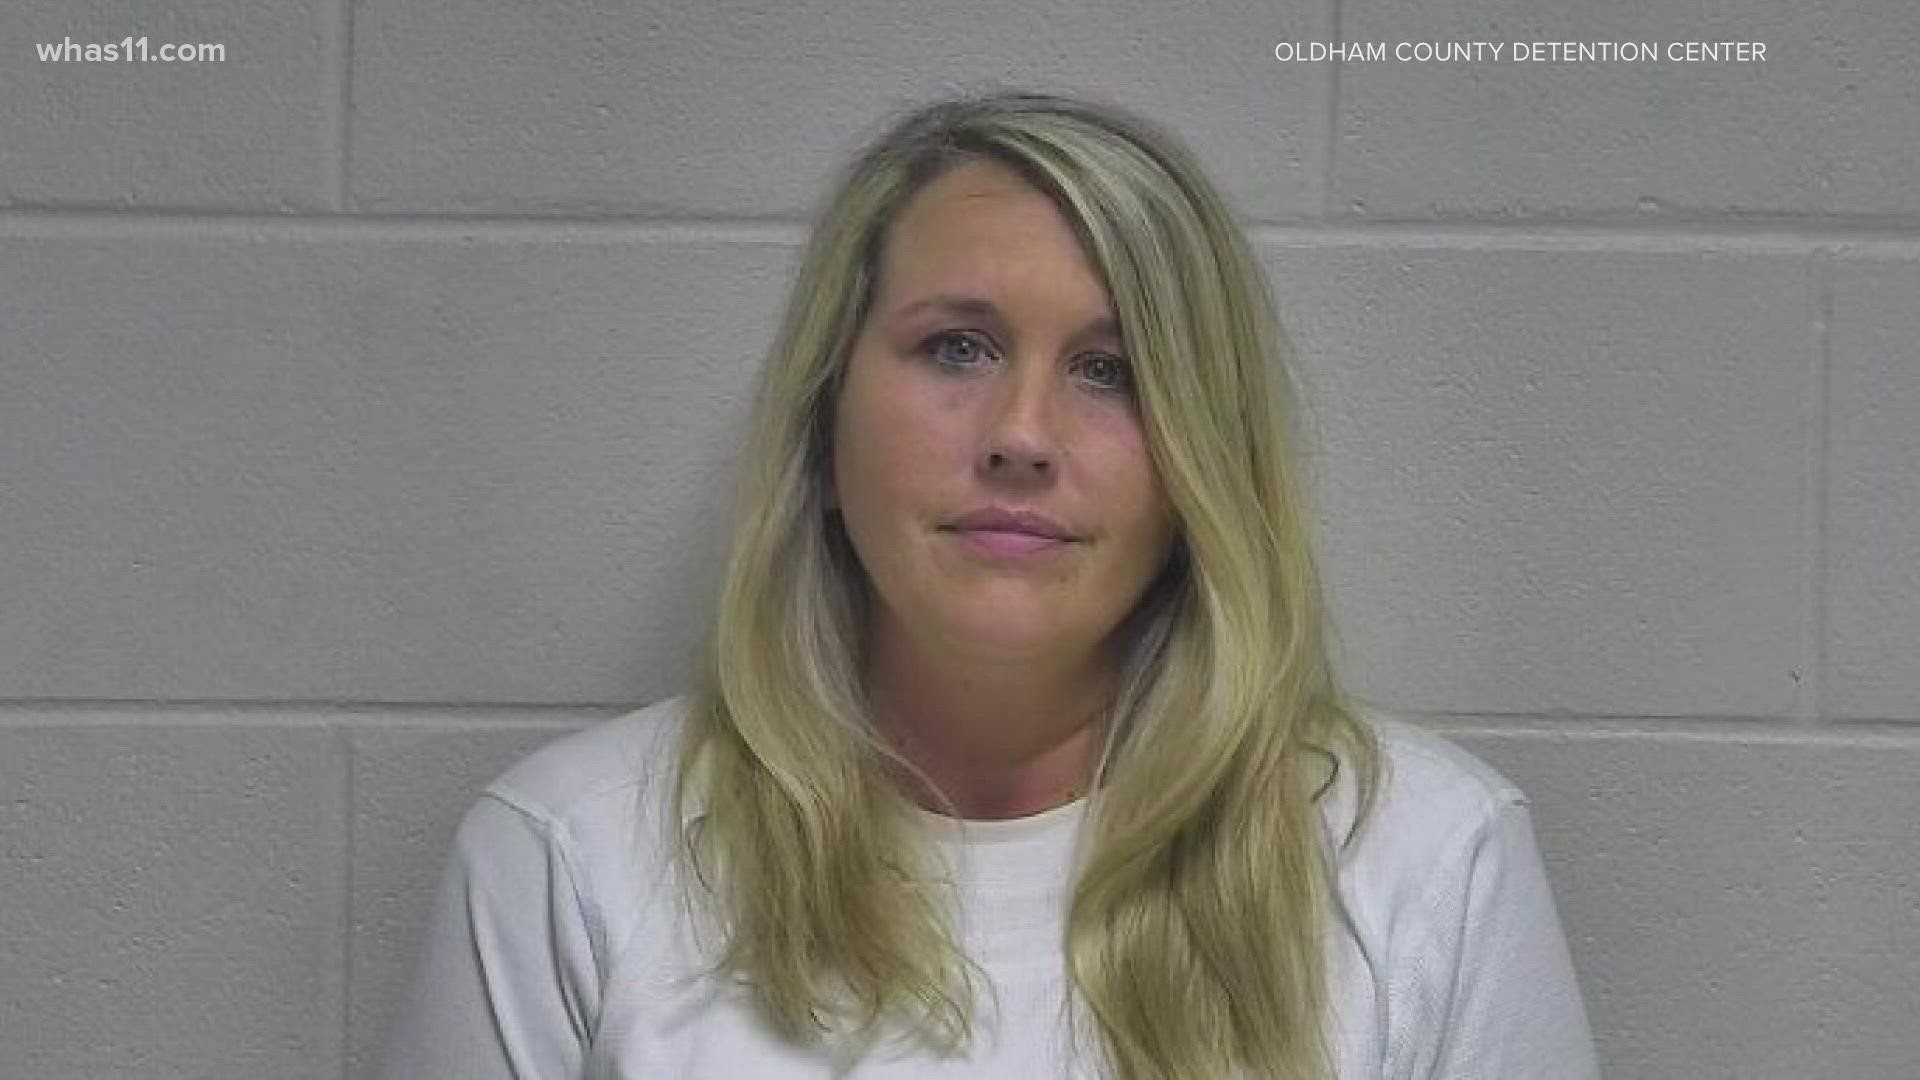 Police arrested Theresa Devine on April 11, months after she was involved in a crash that killed a 16-year-old on U.S. 42. Officials say she turned herself in.